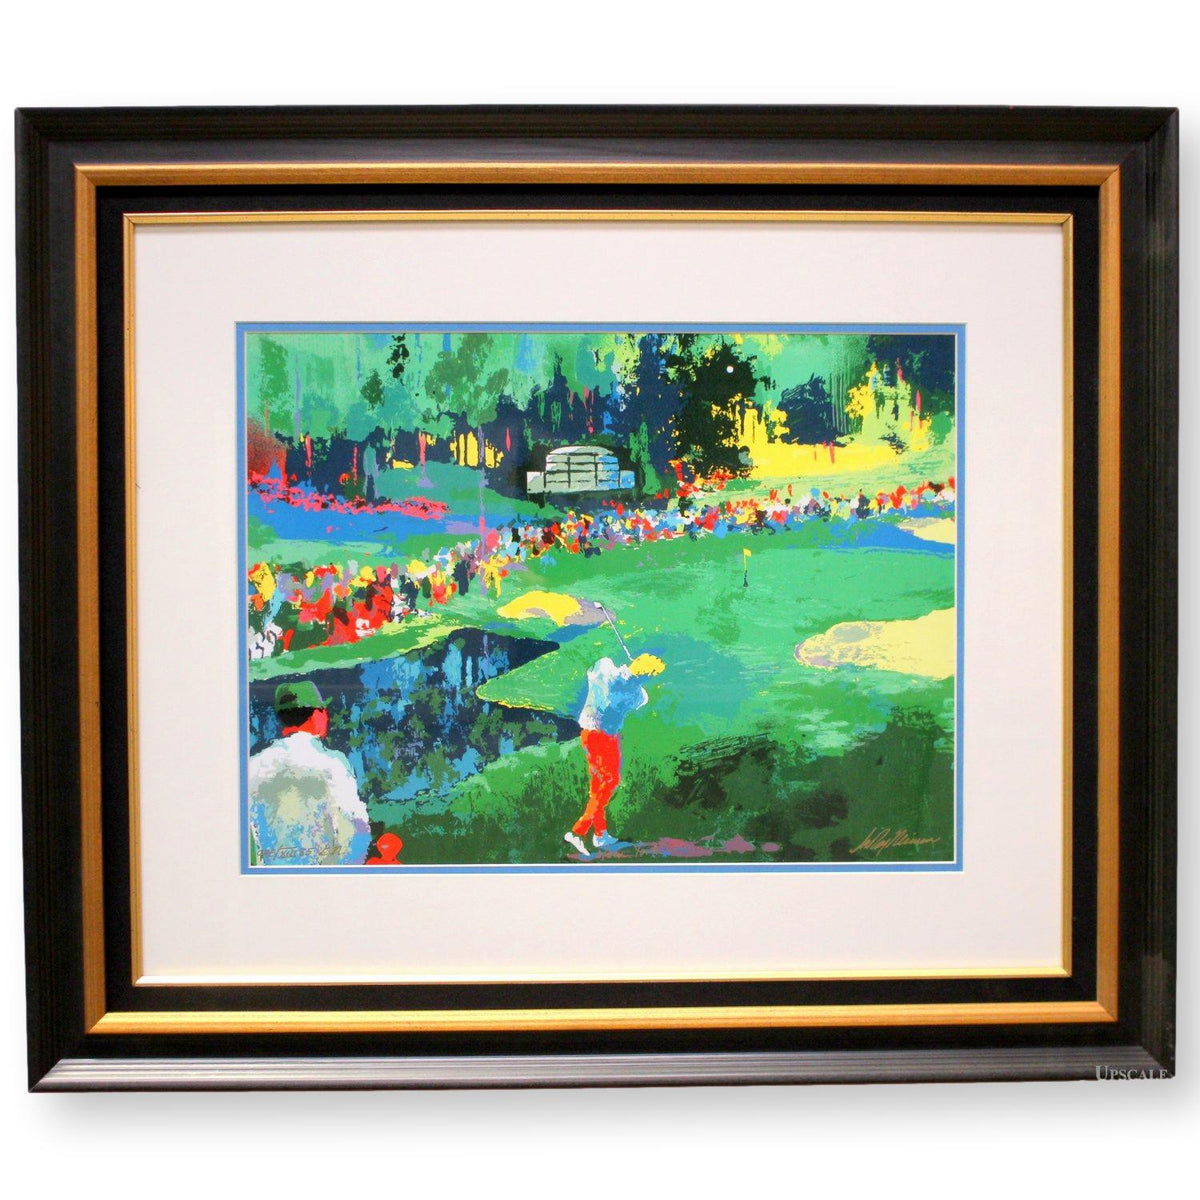 "16th at Augusta" by Leroy Neiman